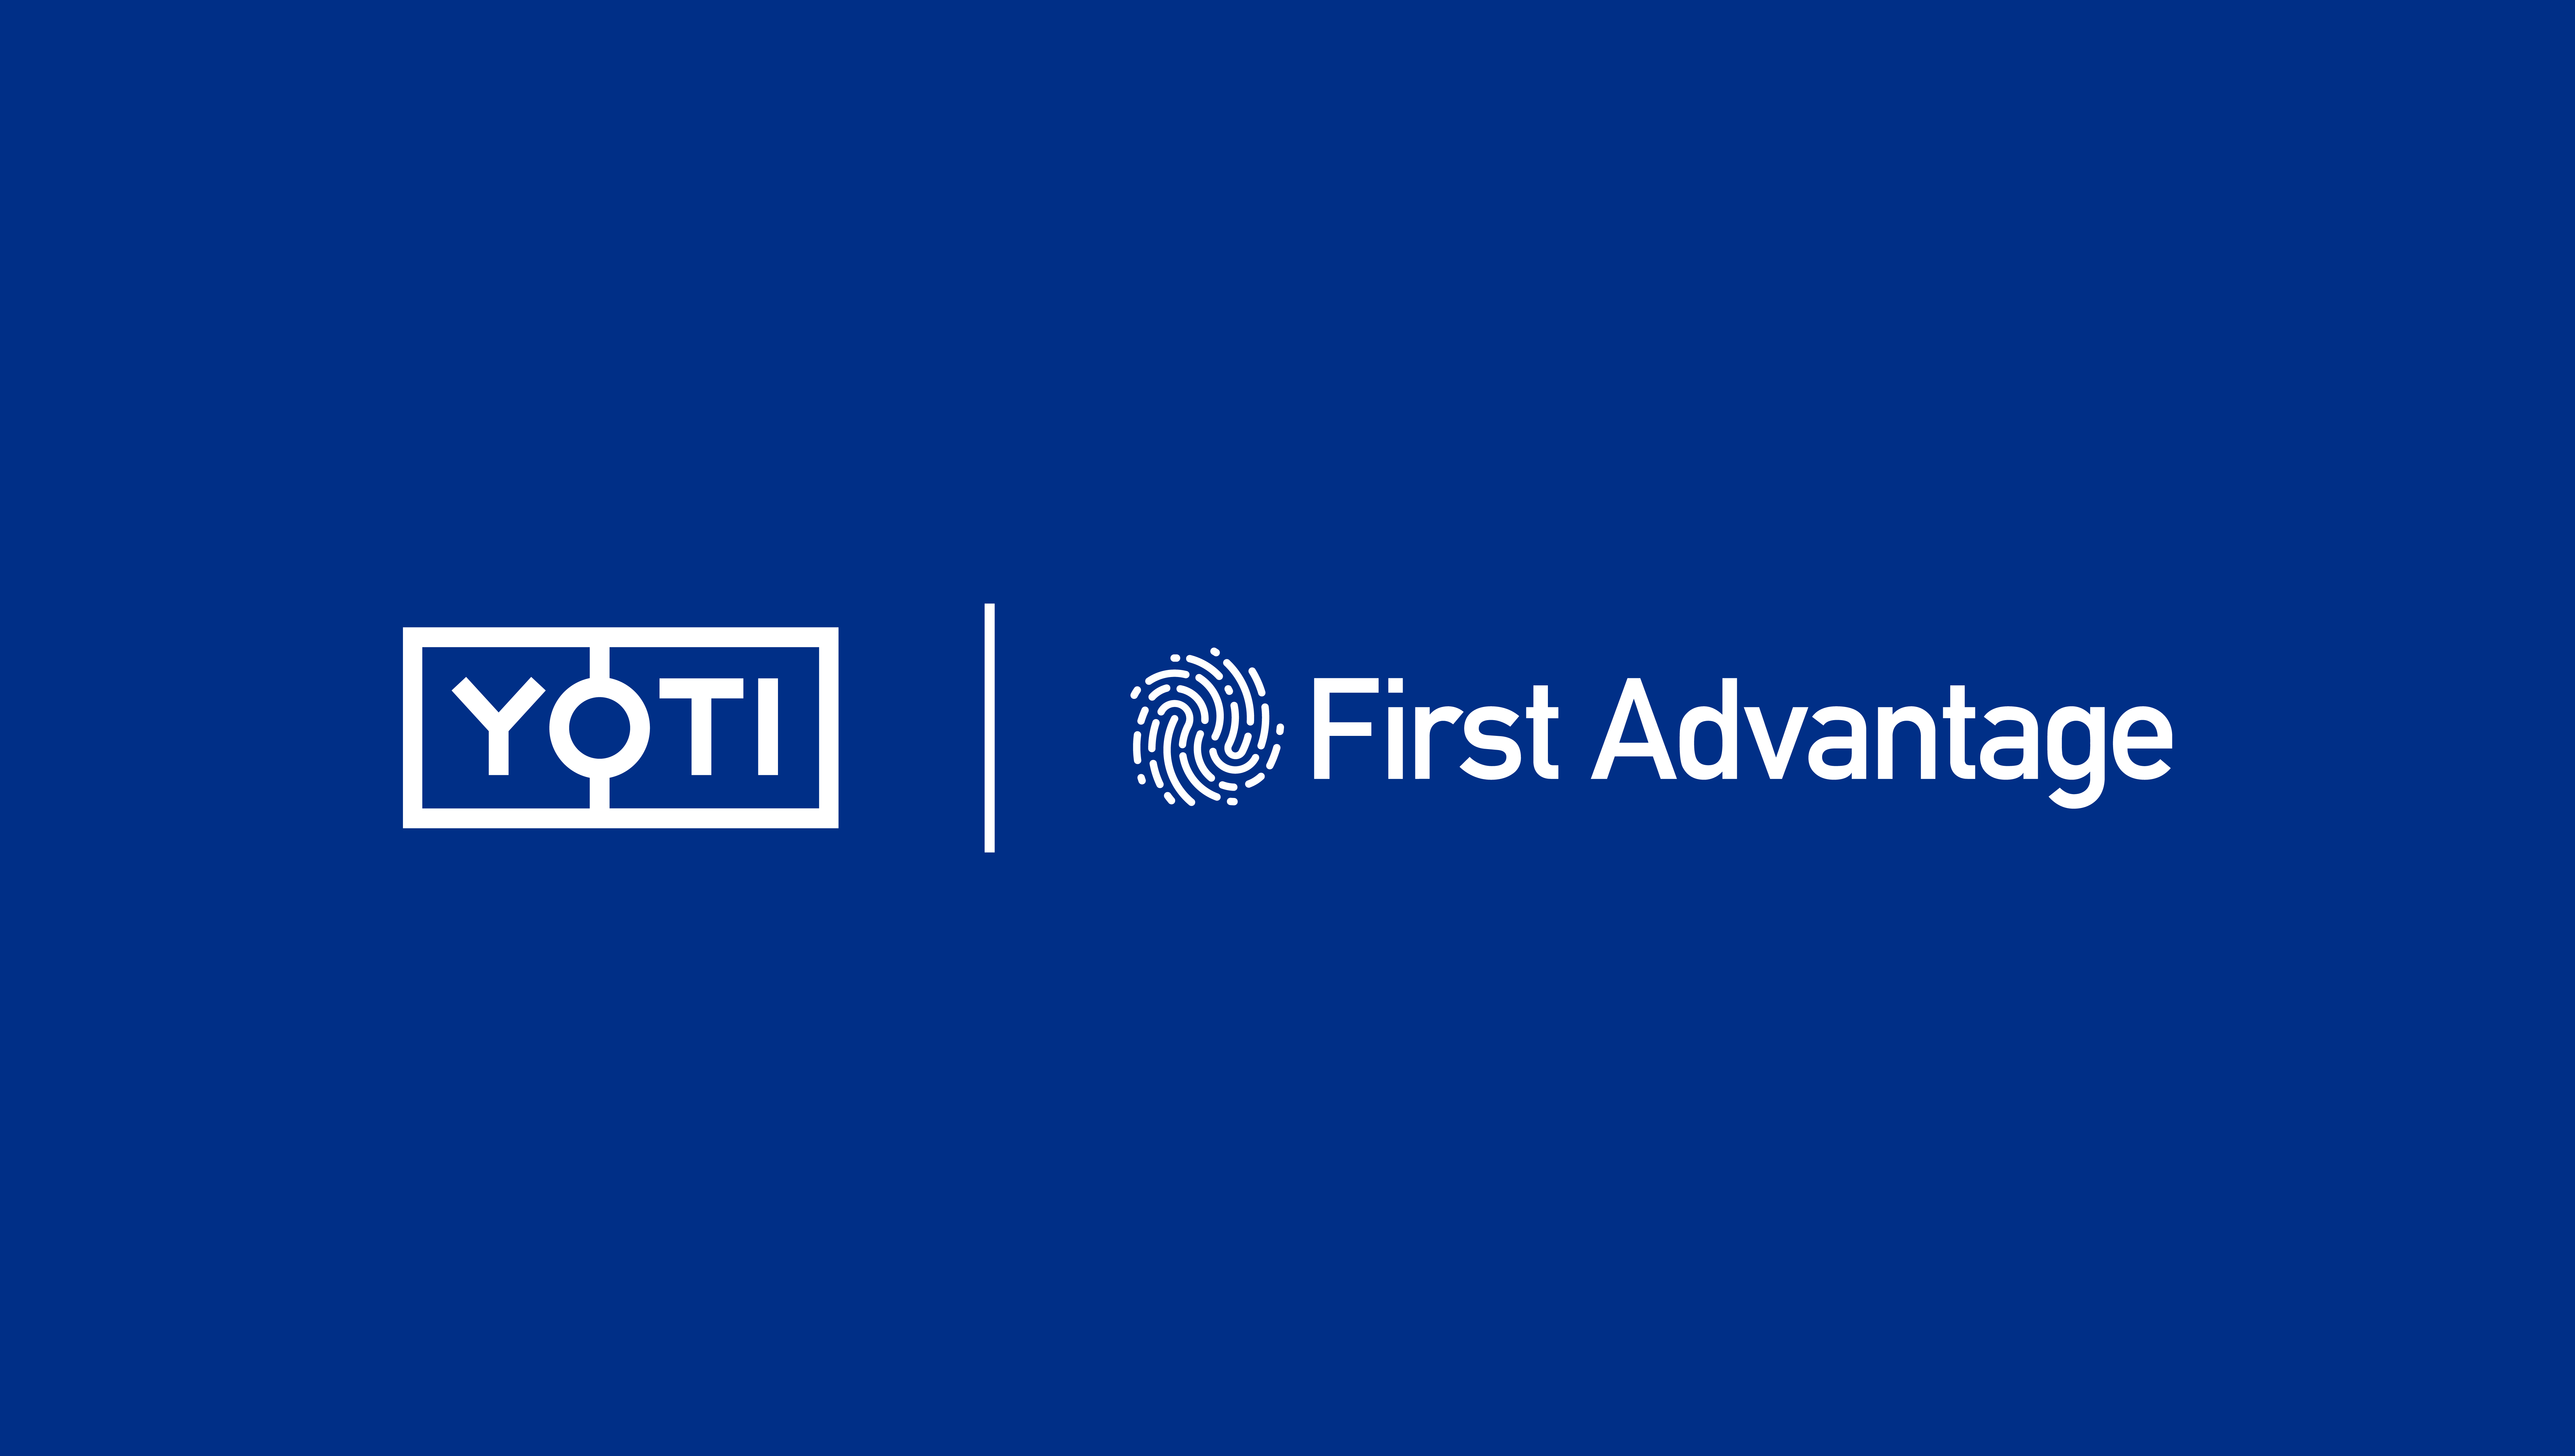 Yoti and FirstAdvantage logos presented together